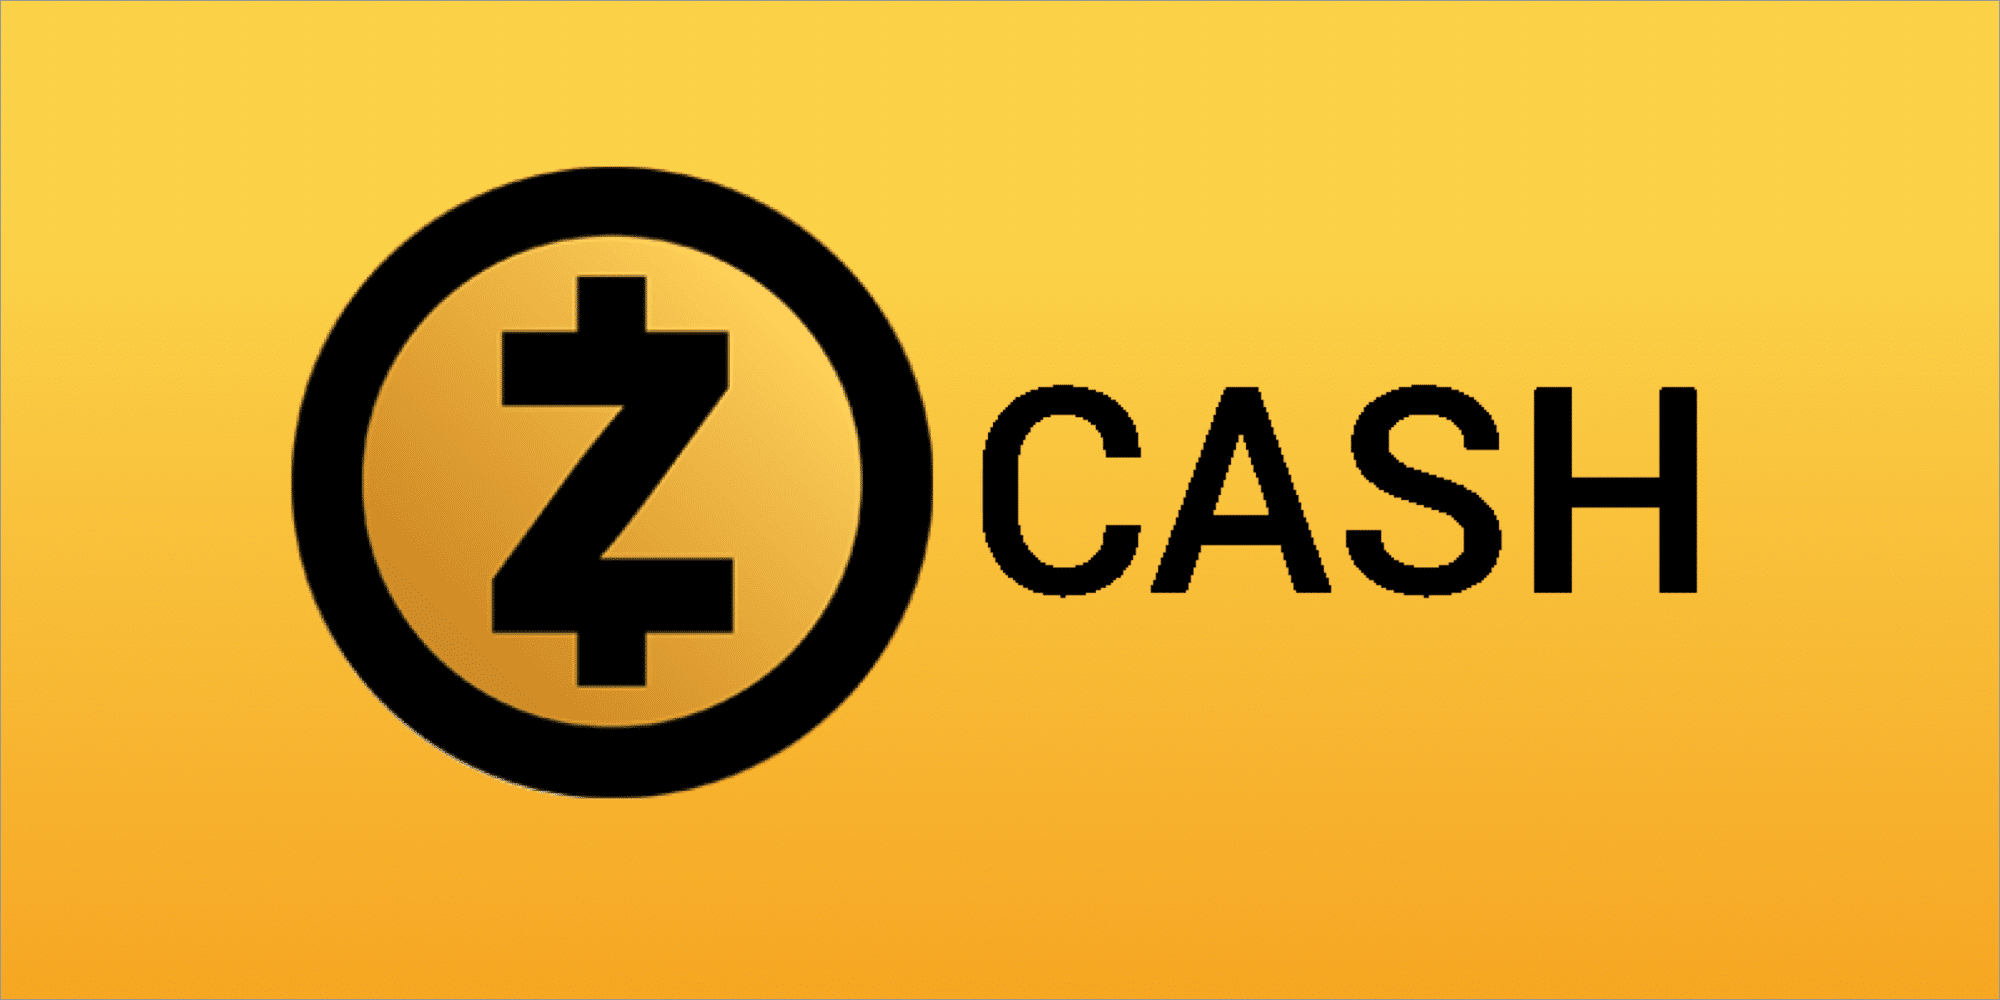 A $ Twitter Bounty Just Showed That ZCash Can be Cracked Easily